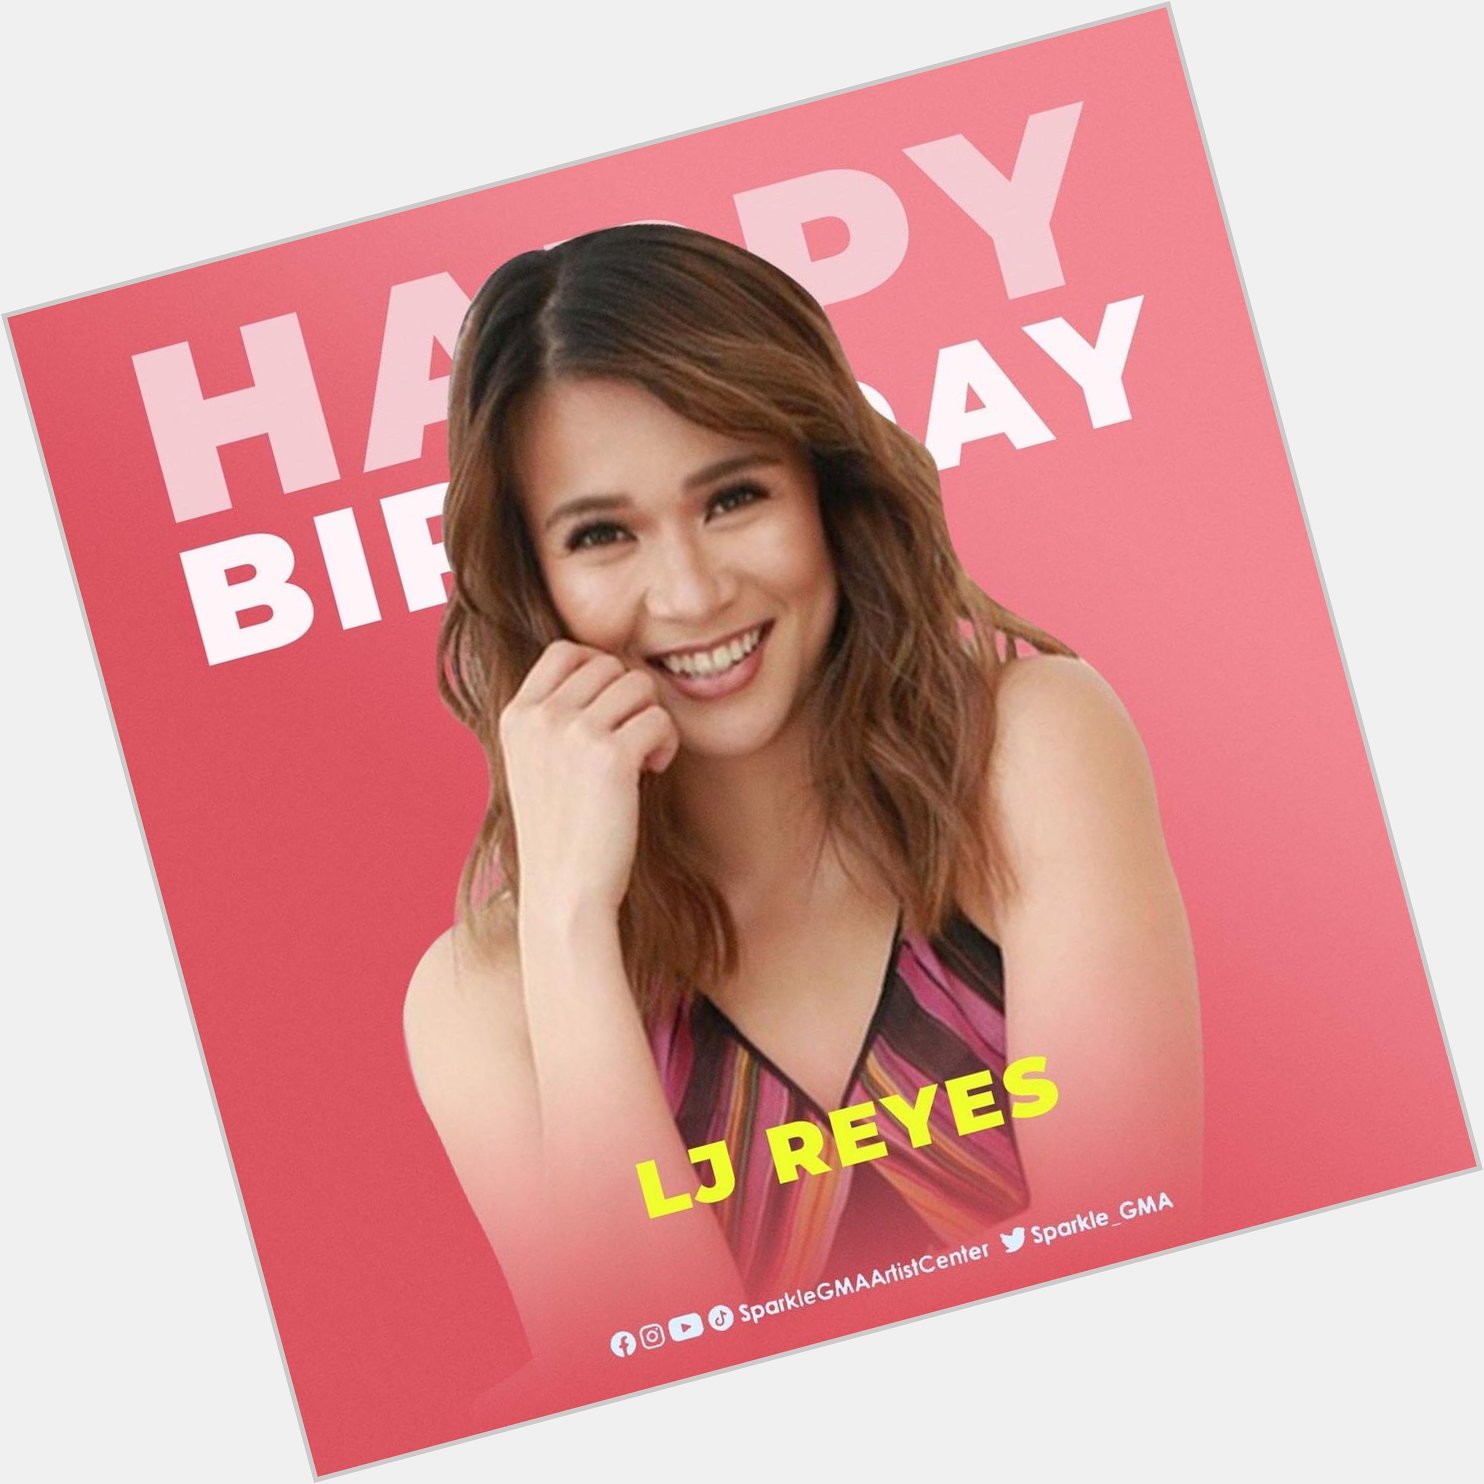 Happy birthday and Merry Christmas, LJ Reyes! Your Sparkle family misses and loves you. 